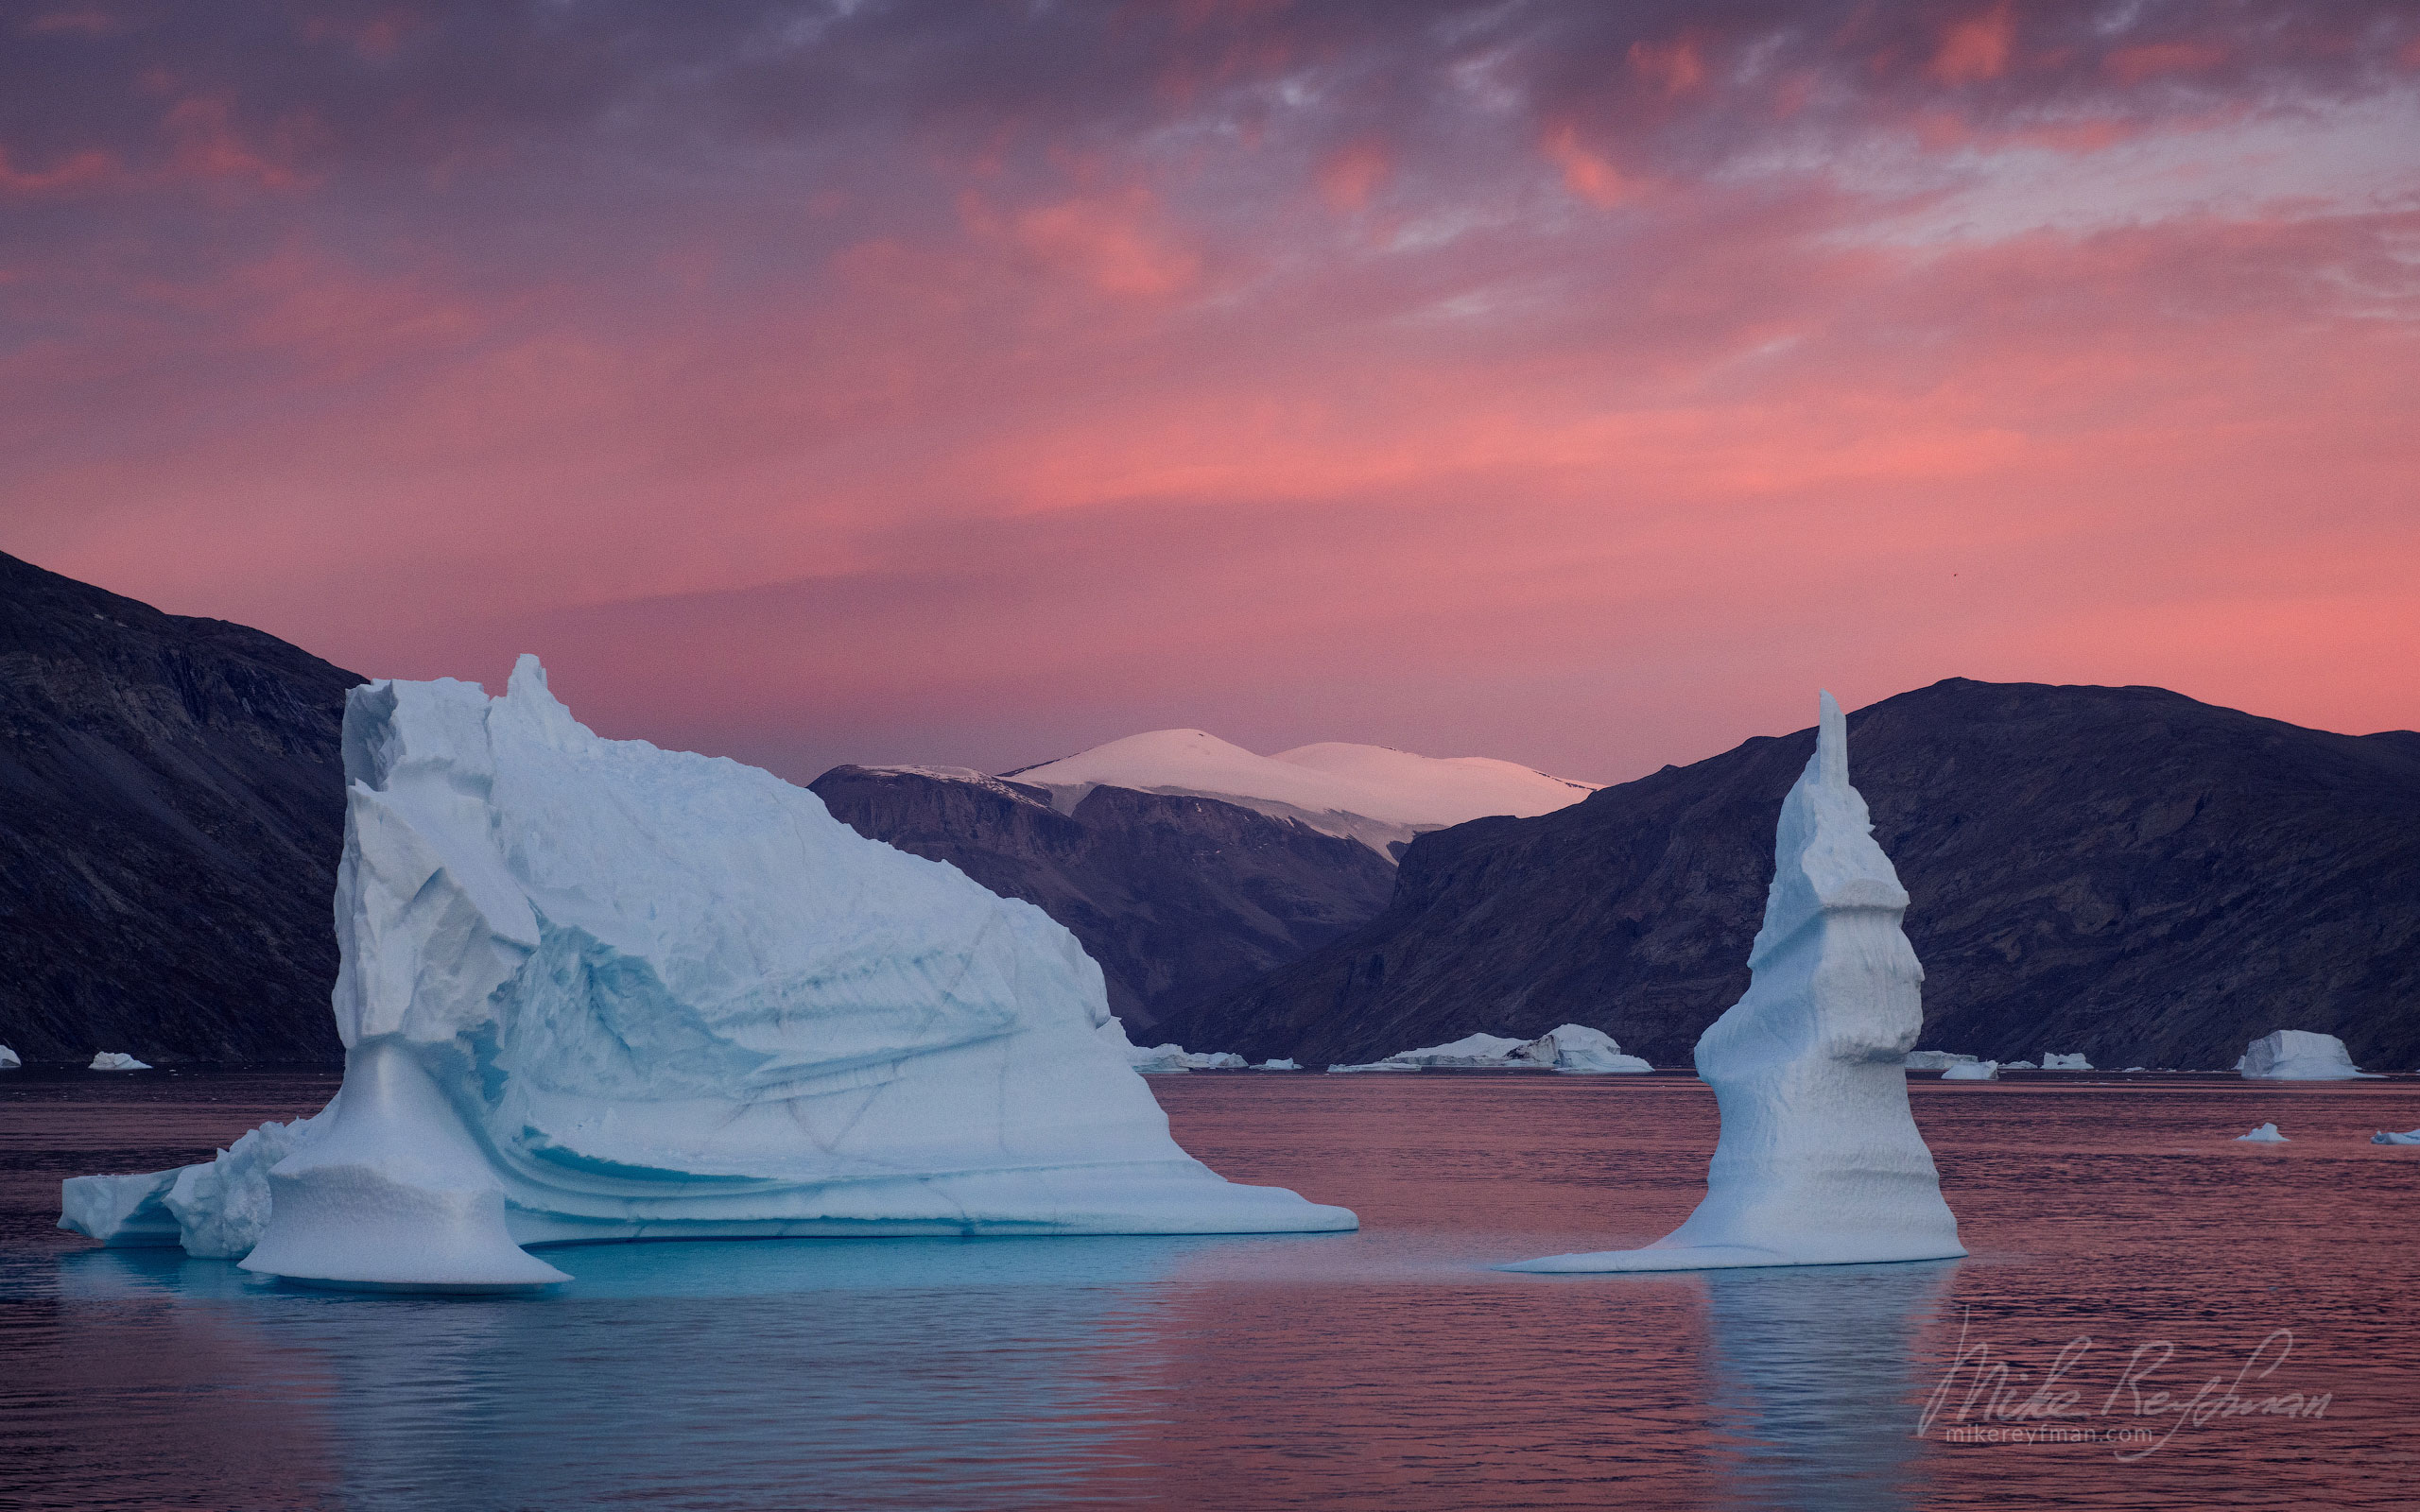 Icebergs in Scoresby Sund. Greenland. 010-GR-SC_50B6959 - The Scoresby Sund fjord system and the settlement of Ittoqqortoormiit. East Greenland. - Mike Reyfman Photography